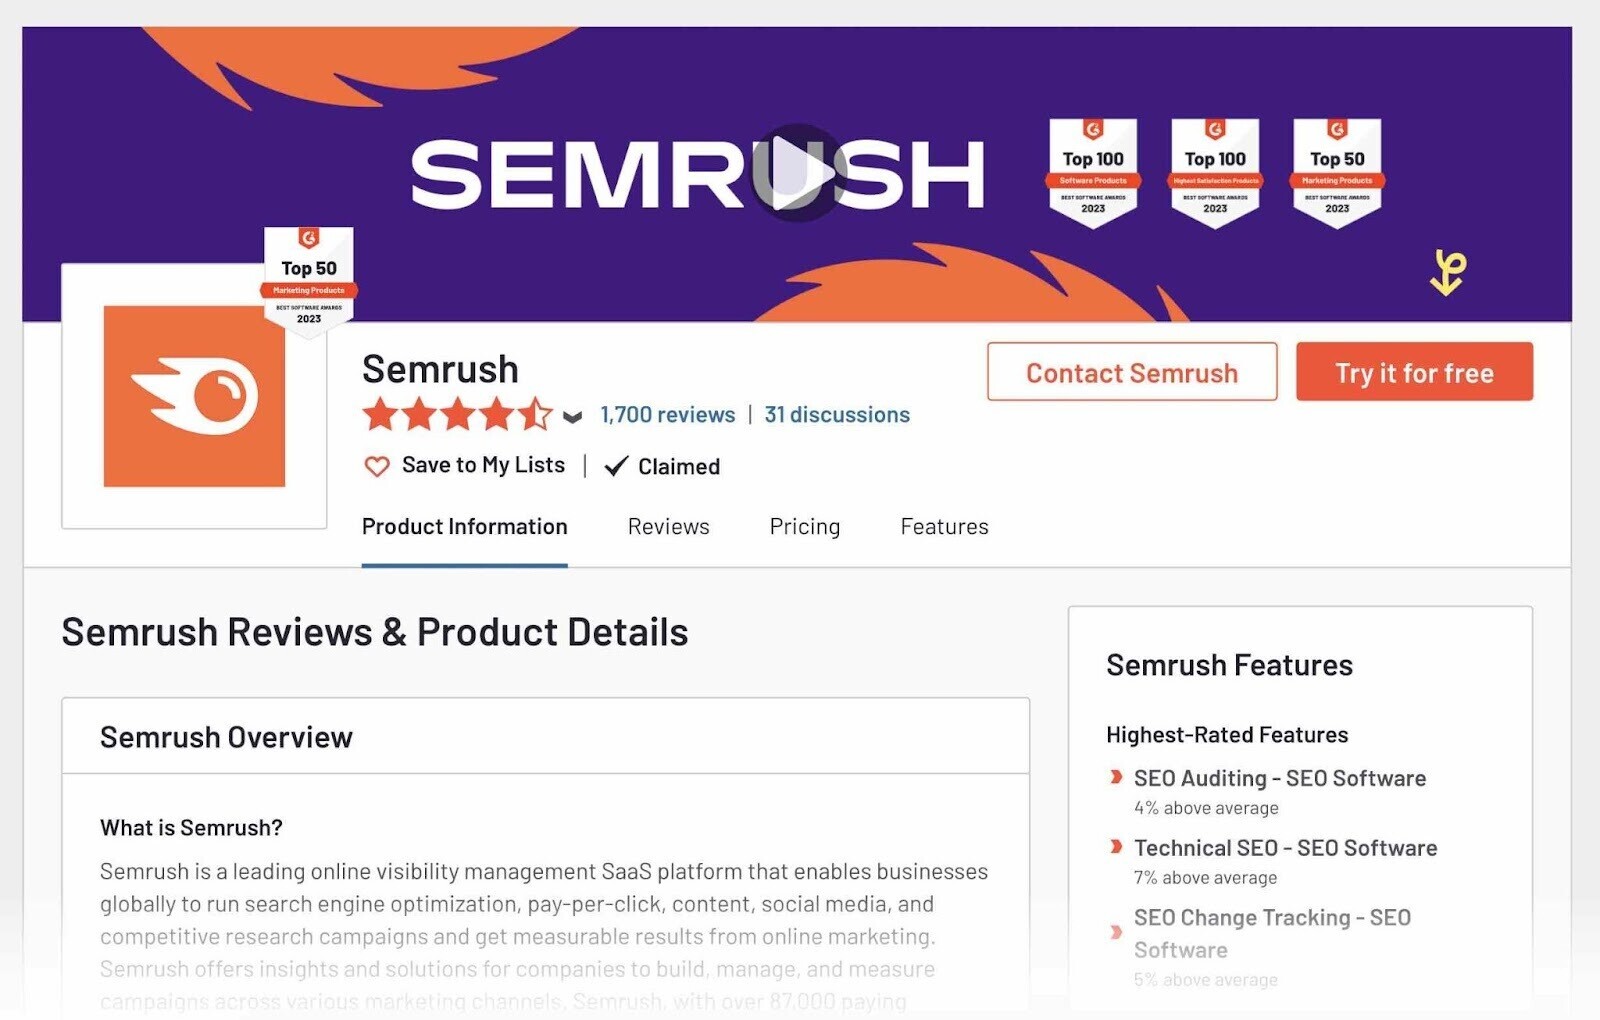 Semrush's G2 review page